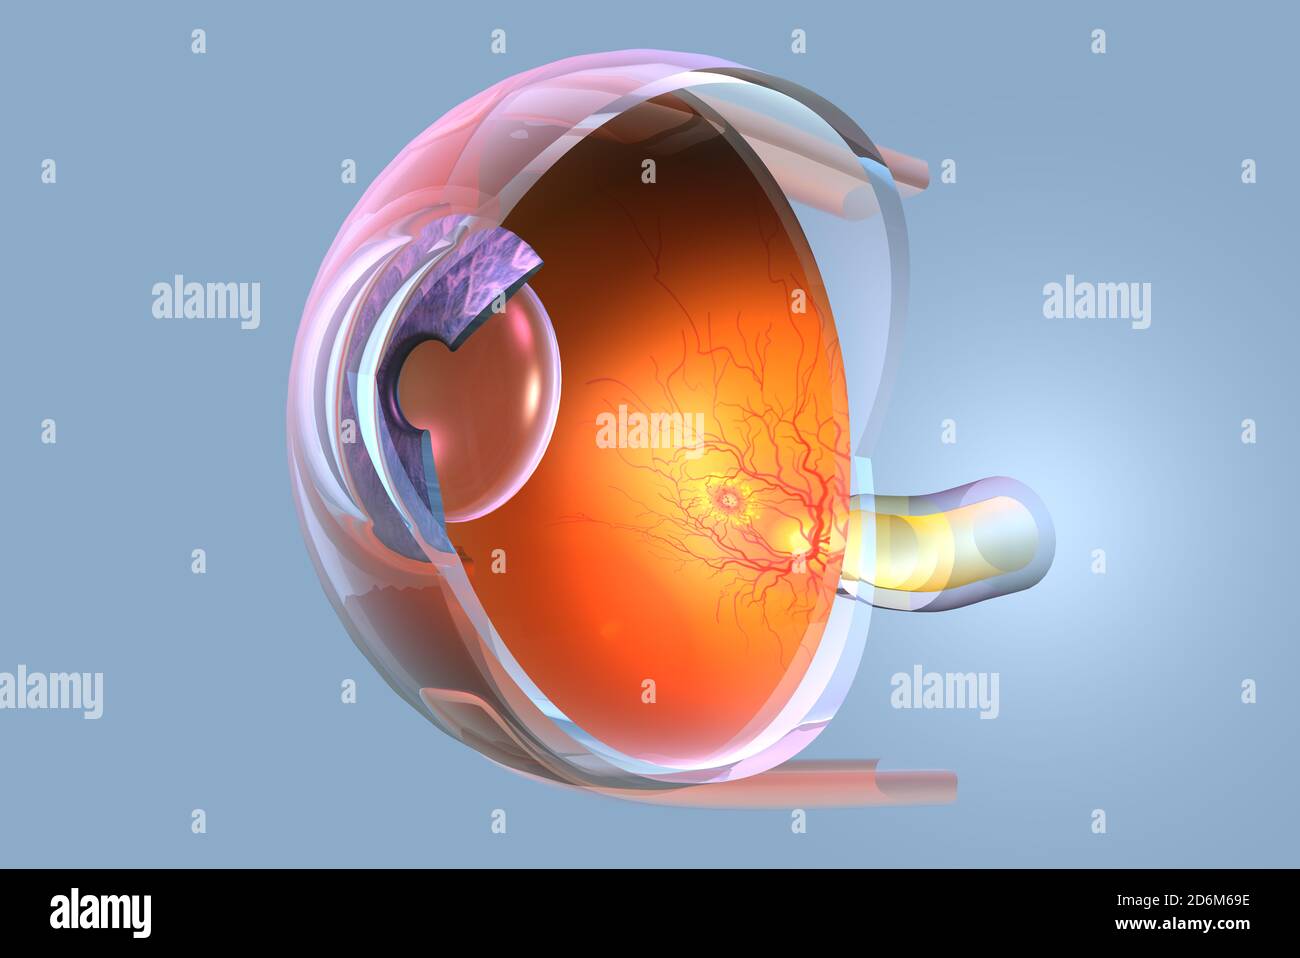 Medically 3D illustration showing human eye with retina, pupil, iris, anterior chamber, posterior chamber, ciliary body, eye ball, blood vessels, macu Stock Photo